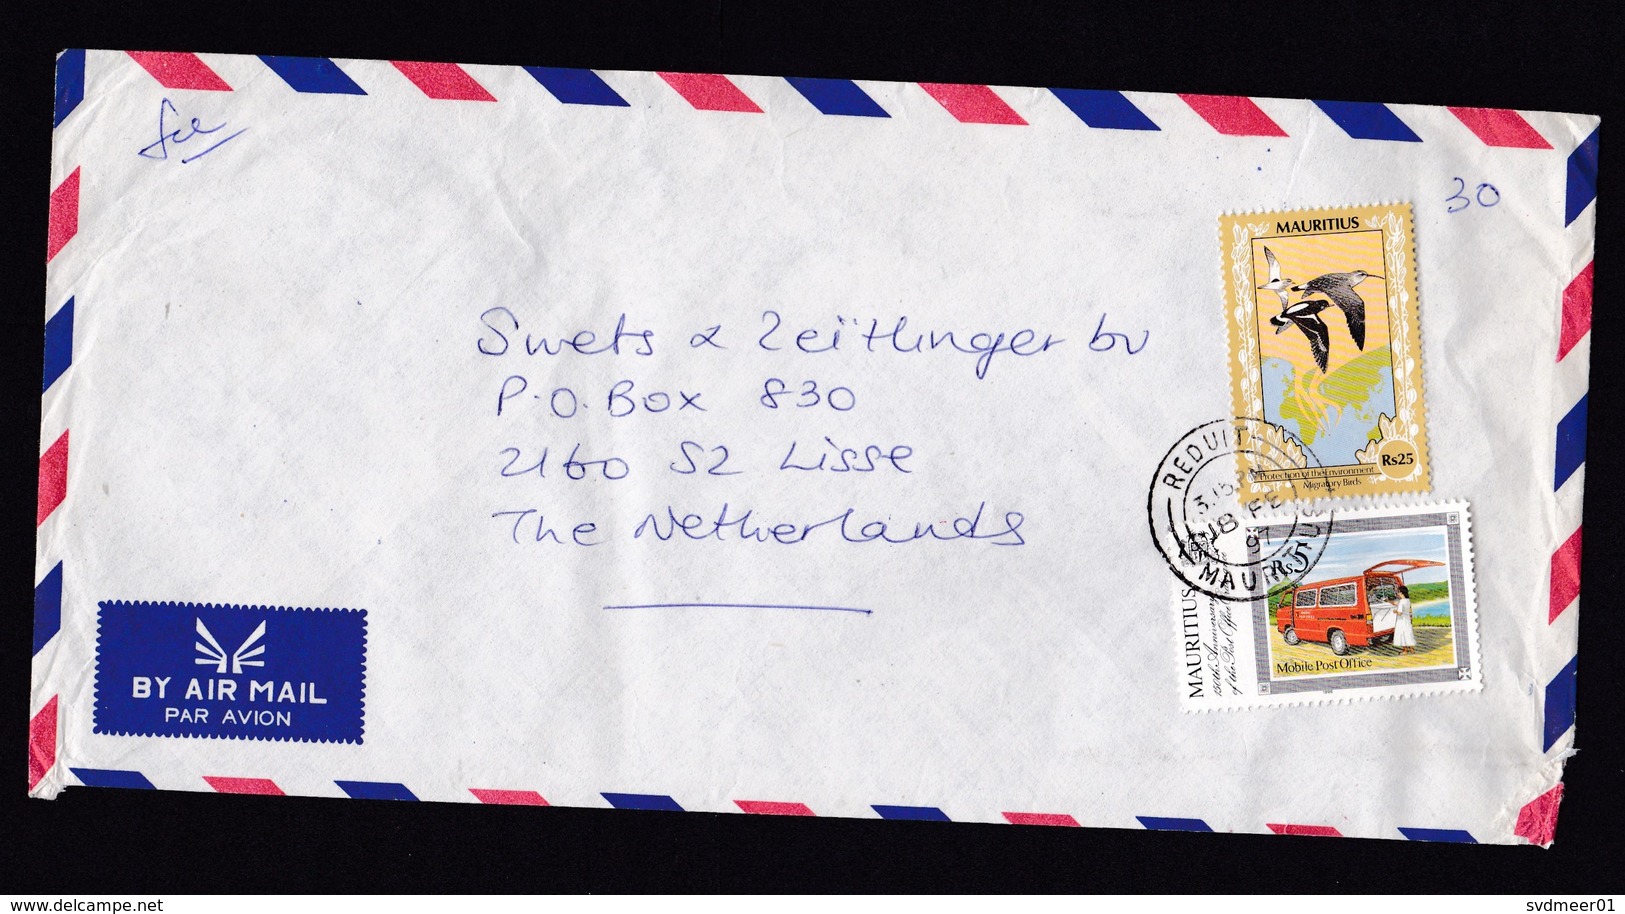 Mauritius: Airmail Cover Reduit To Netherlands, 1997, 2 Stamps, Bird, Map, Mobile Post Office Car (minor Damage) - Mauritius (1968-...)